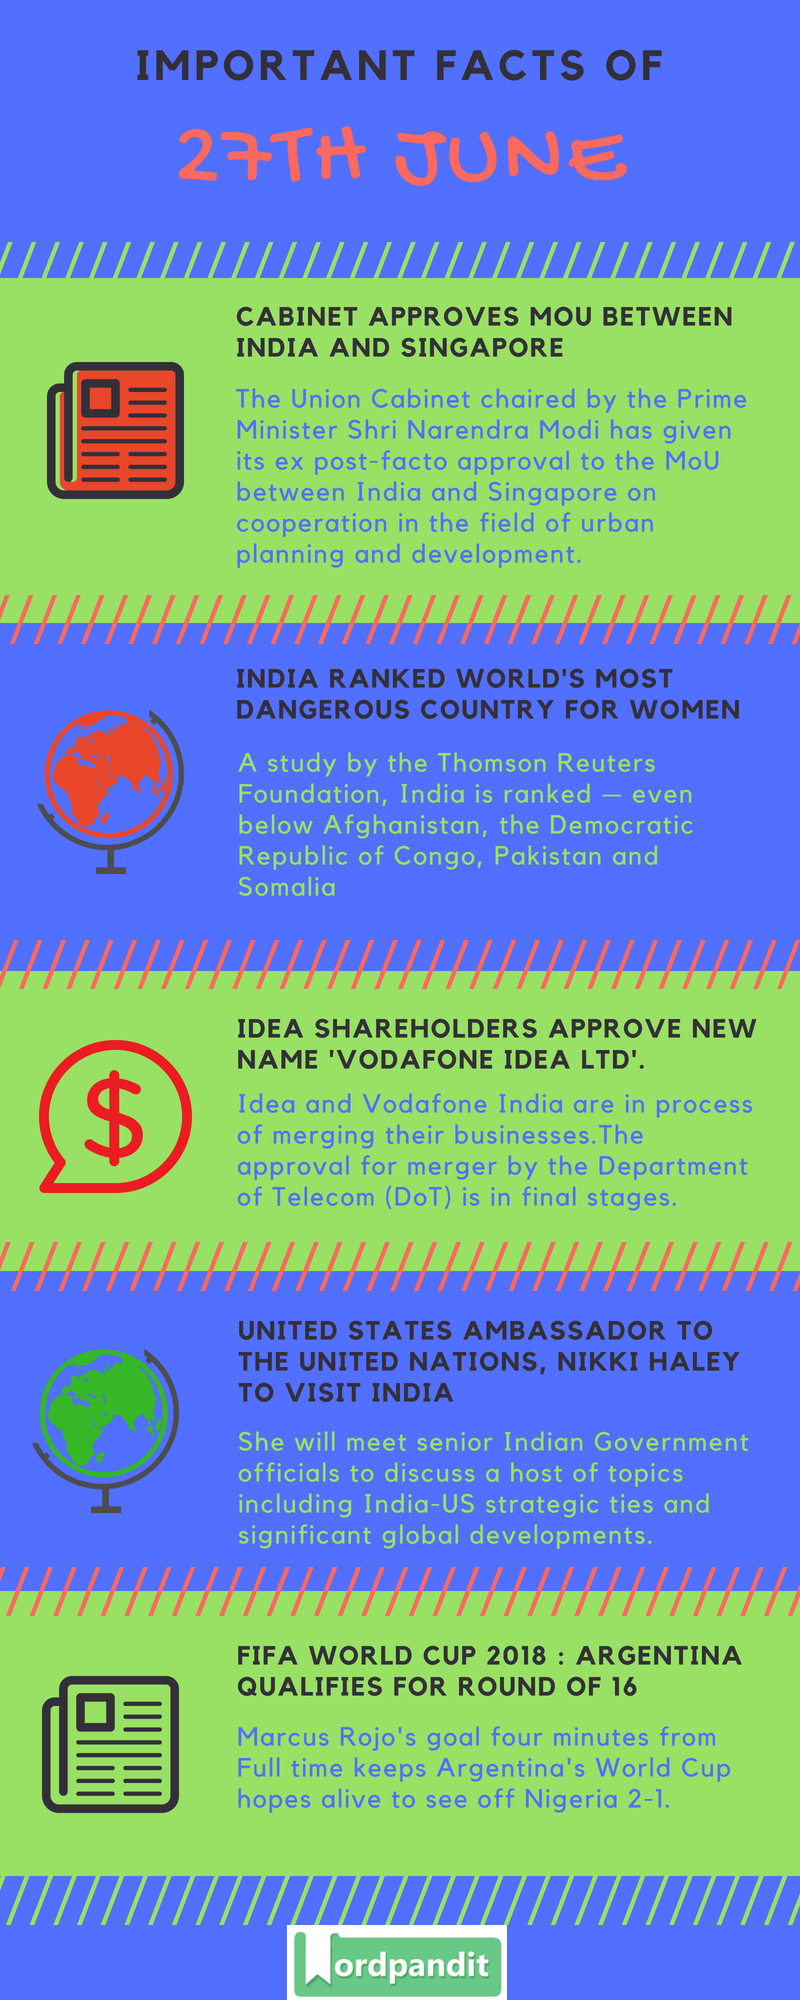 Daily Current Affairs 27 June 2018 Current Affairs Quiz June 27 2018 Current Affairs Infographic